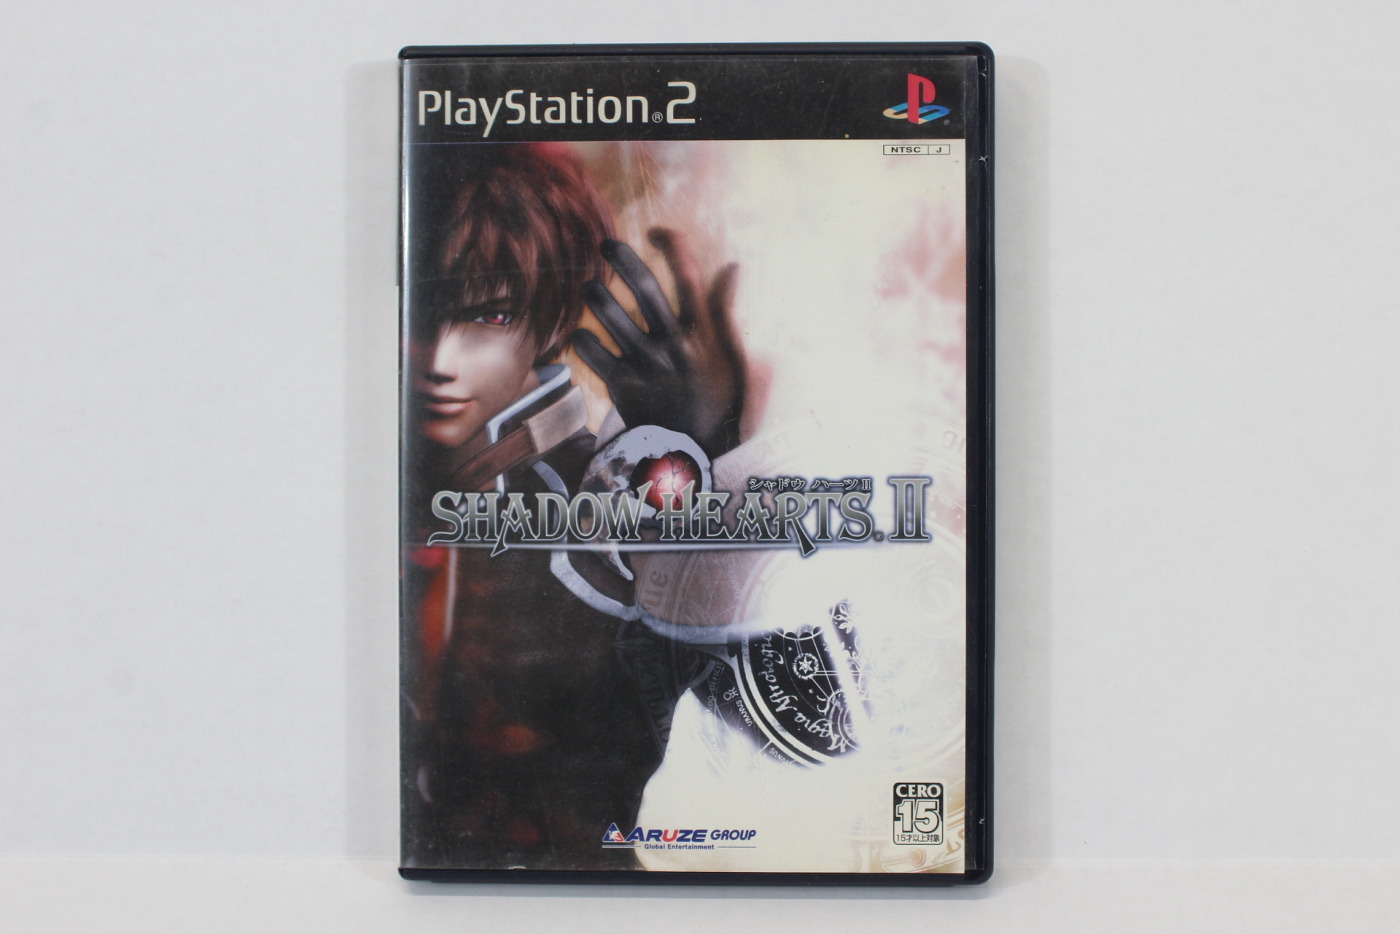 Shadow of the Colossus Wanda to Kyuzou the Best (B) PS2 – Retro Games Japan